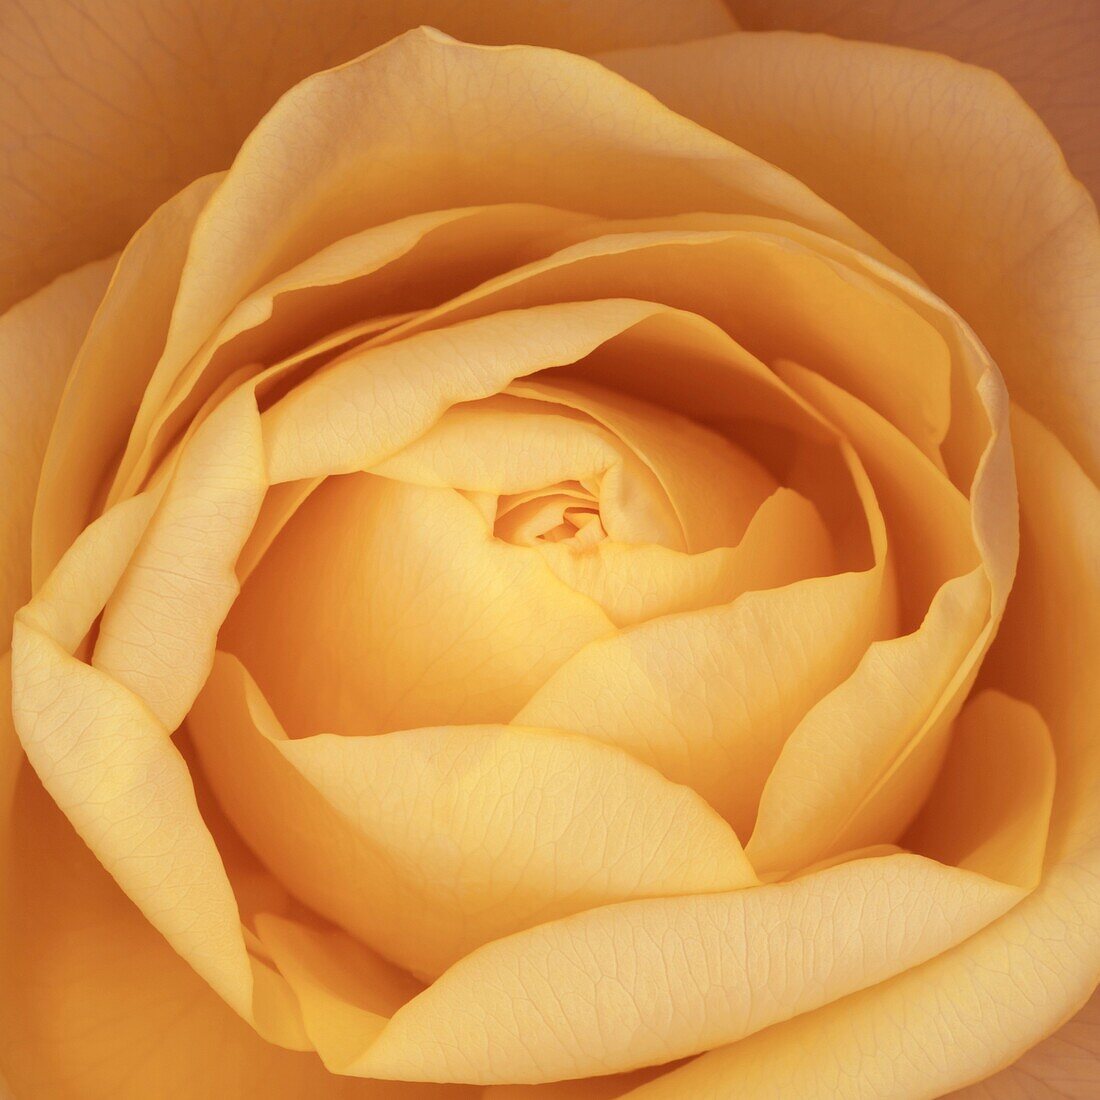 Delicious close up of an orange rose opening petals, tight center